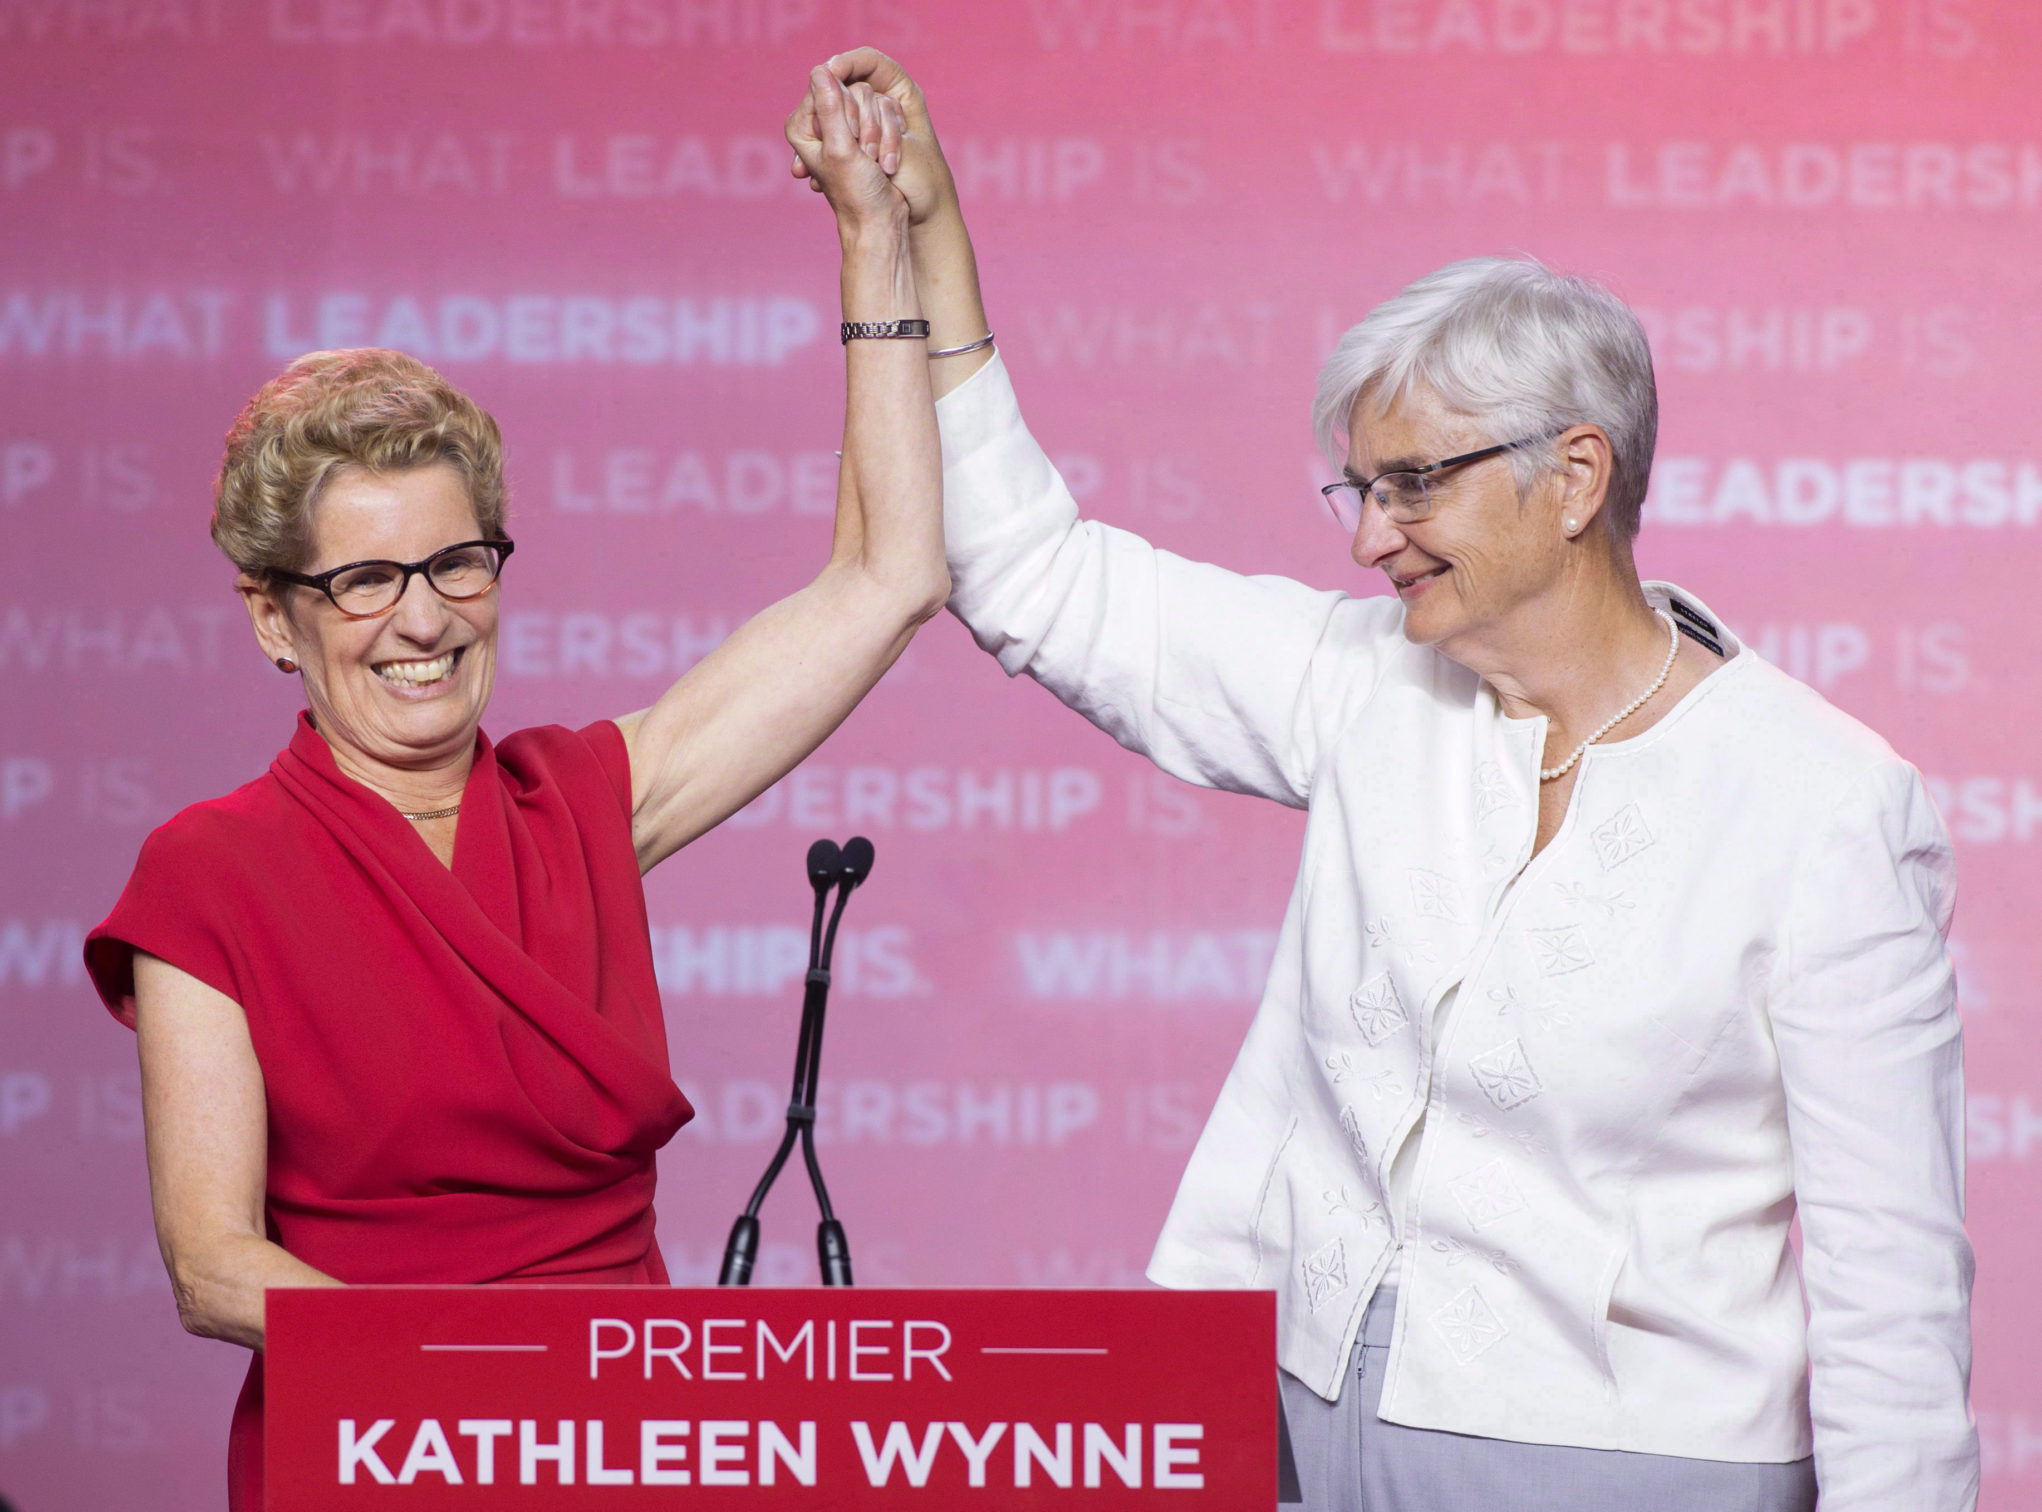 Former Ontario premier Kathleen Wynne celebrates with partner Jane Rounthwaite after winning the provincial election in Toronto on June 12, 2014.